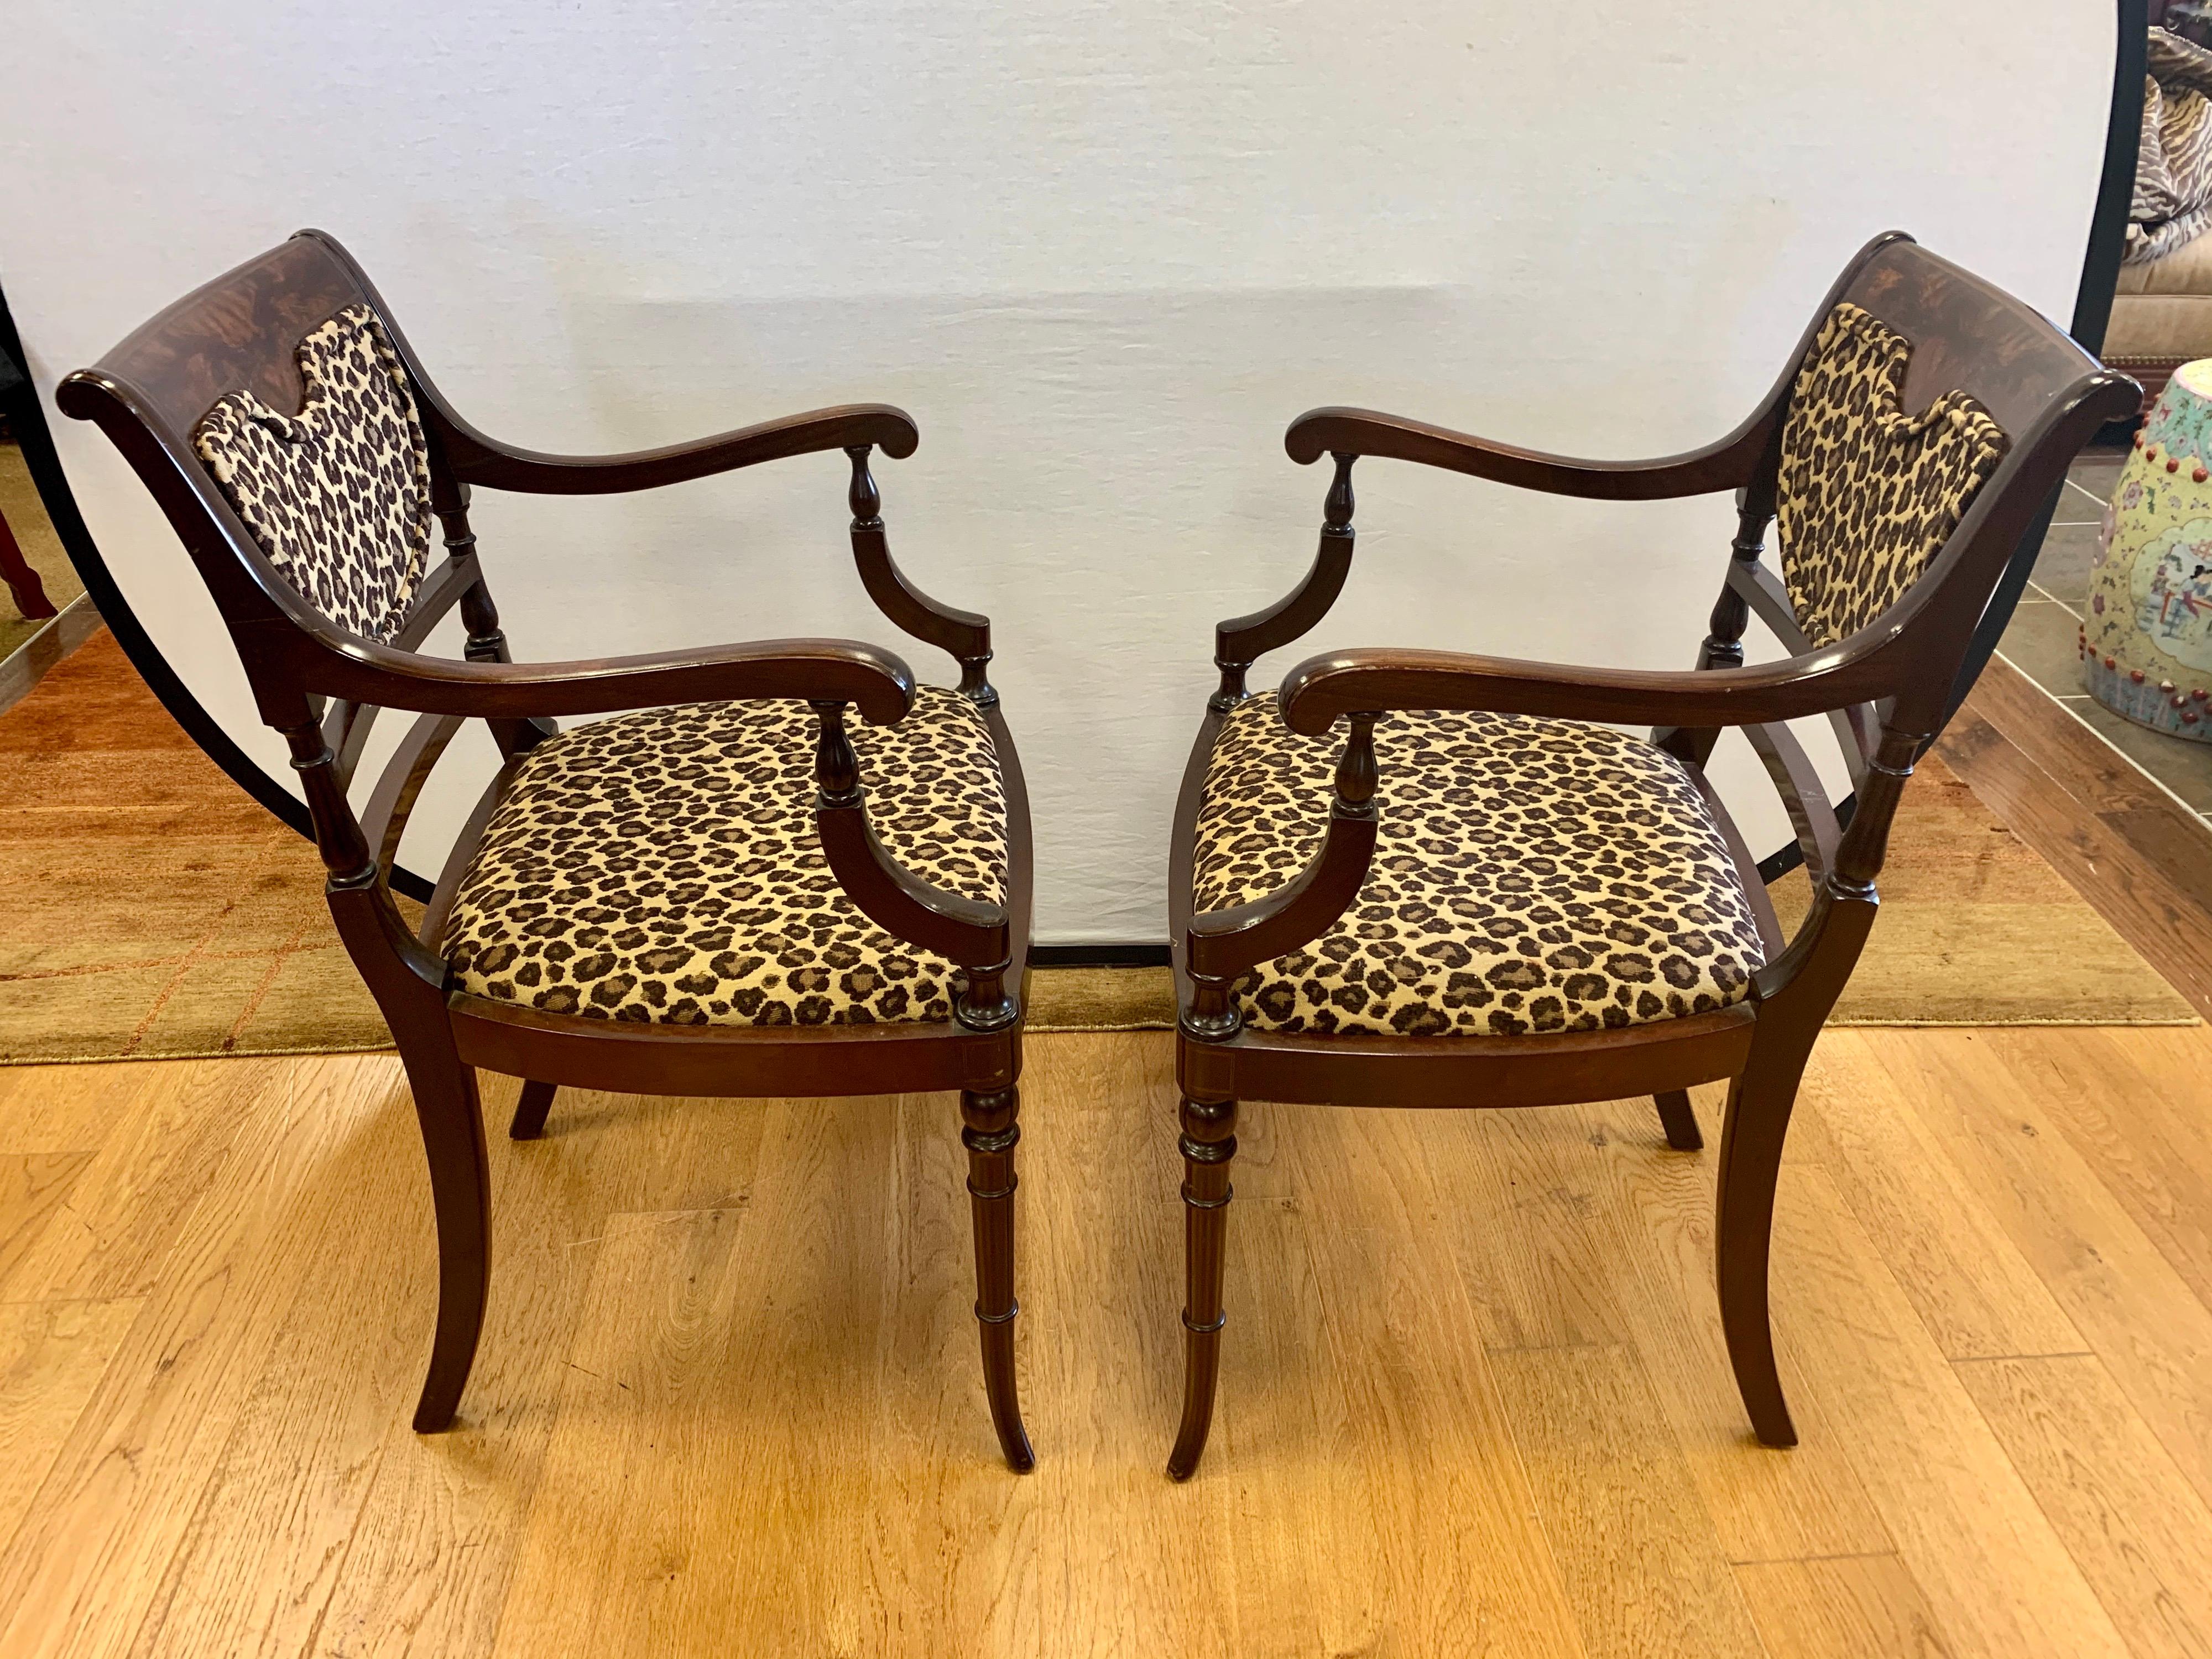 Elegant pair of matching mahogany federal style arm chairs newly upholstered in leopard fabric.
All dimensions are below. Impeccable craftsmanship and scale. Not too big but not too small.
The fabric really pops offset against the rich mahogany